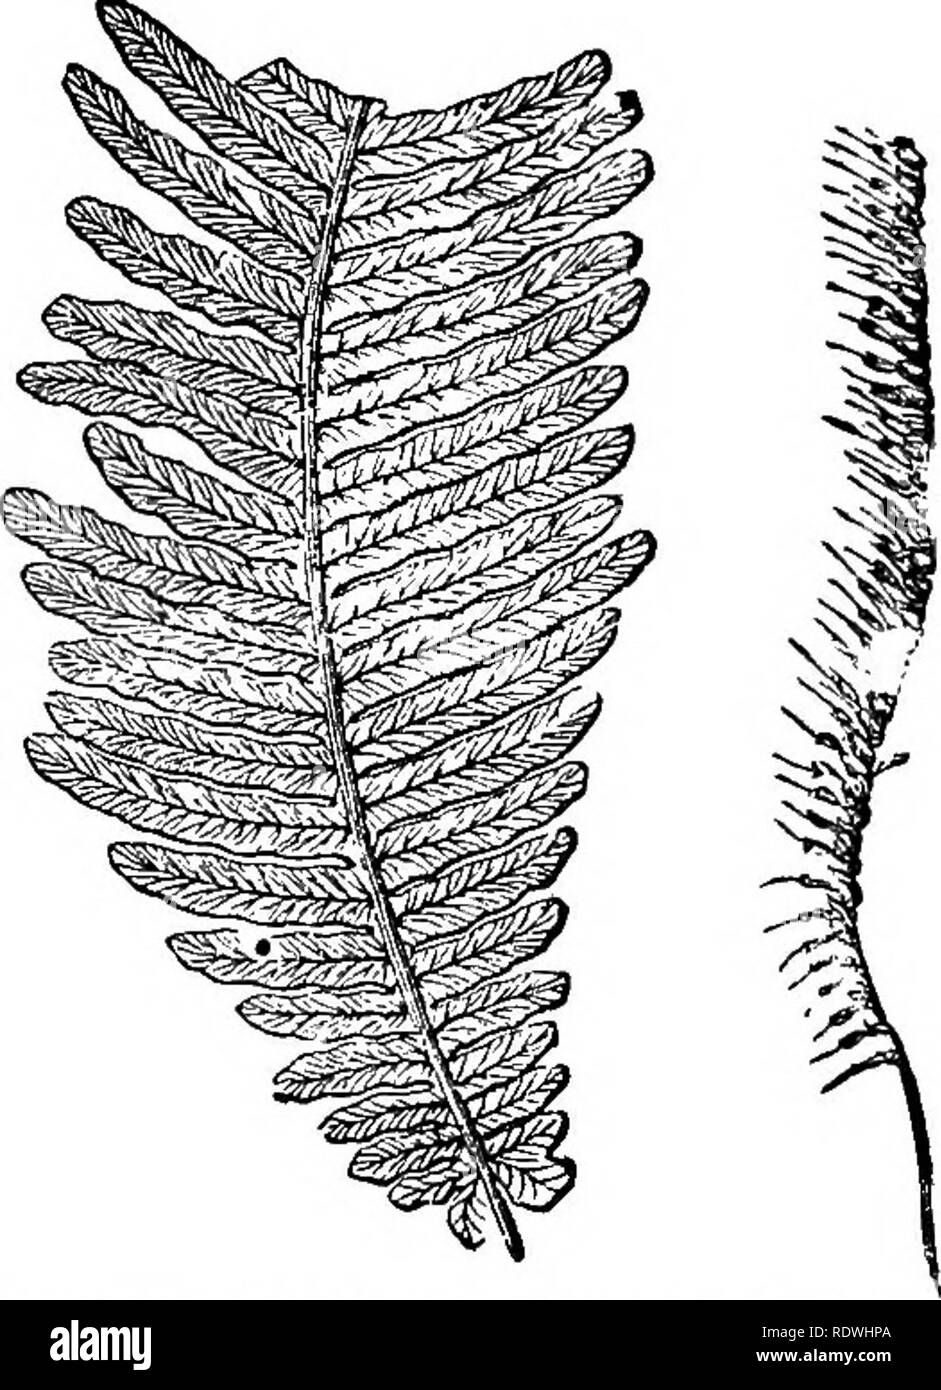 . Ferns: British &amp; foreign. The history, organography, classification, and enumeration of the species of garden ferns with a treatise on their cultivation, etc. etc. Ferns. AN ENUMEEATION OF CULTIVATED FEENS. 255 31. T. rigidum, 8w.; Hedw. Fil. mm, la. T. obscurum, Blume.—Tropics. 32. T. fceniculaceum, Bory. T. meifolium, Kaulf. En. Fil. t. 2 {non Bory).— Mauritius and Bourbon. 33. T. meifolium, Bovy, T. Bauerianum, Endl.—East Indiee, Bourbon, Malayan, Philippine and Pacific Islands, Norfolk Island. 34. T. elongattun, A. Cunn.,- Hooh. Ic. PI. t. 701. — New Zealand. 35. T. setigerum, Backho Stock Photo